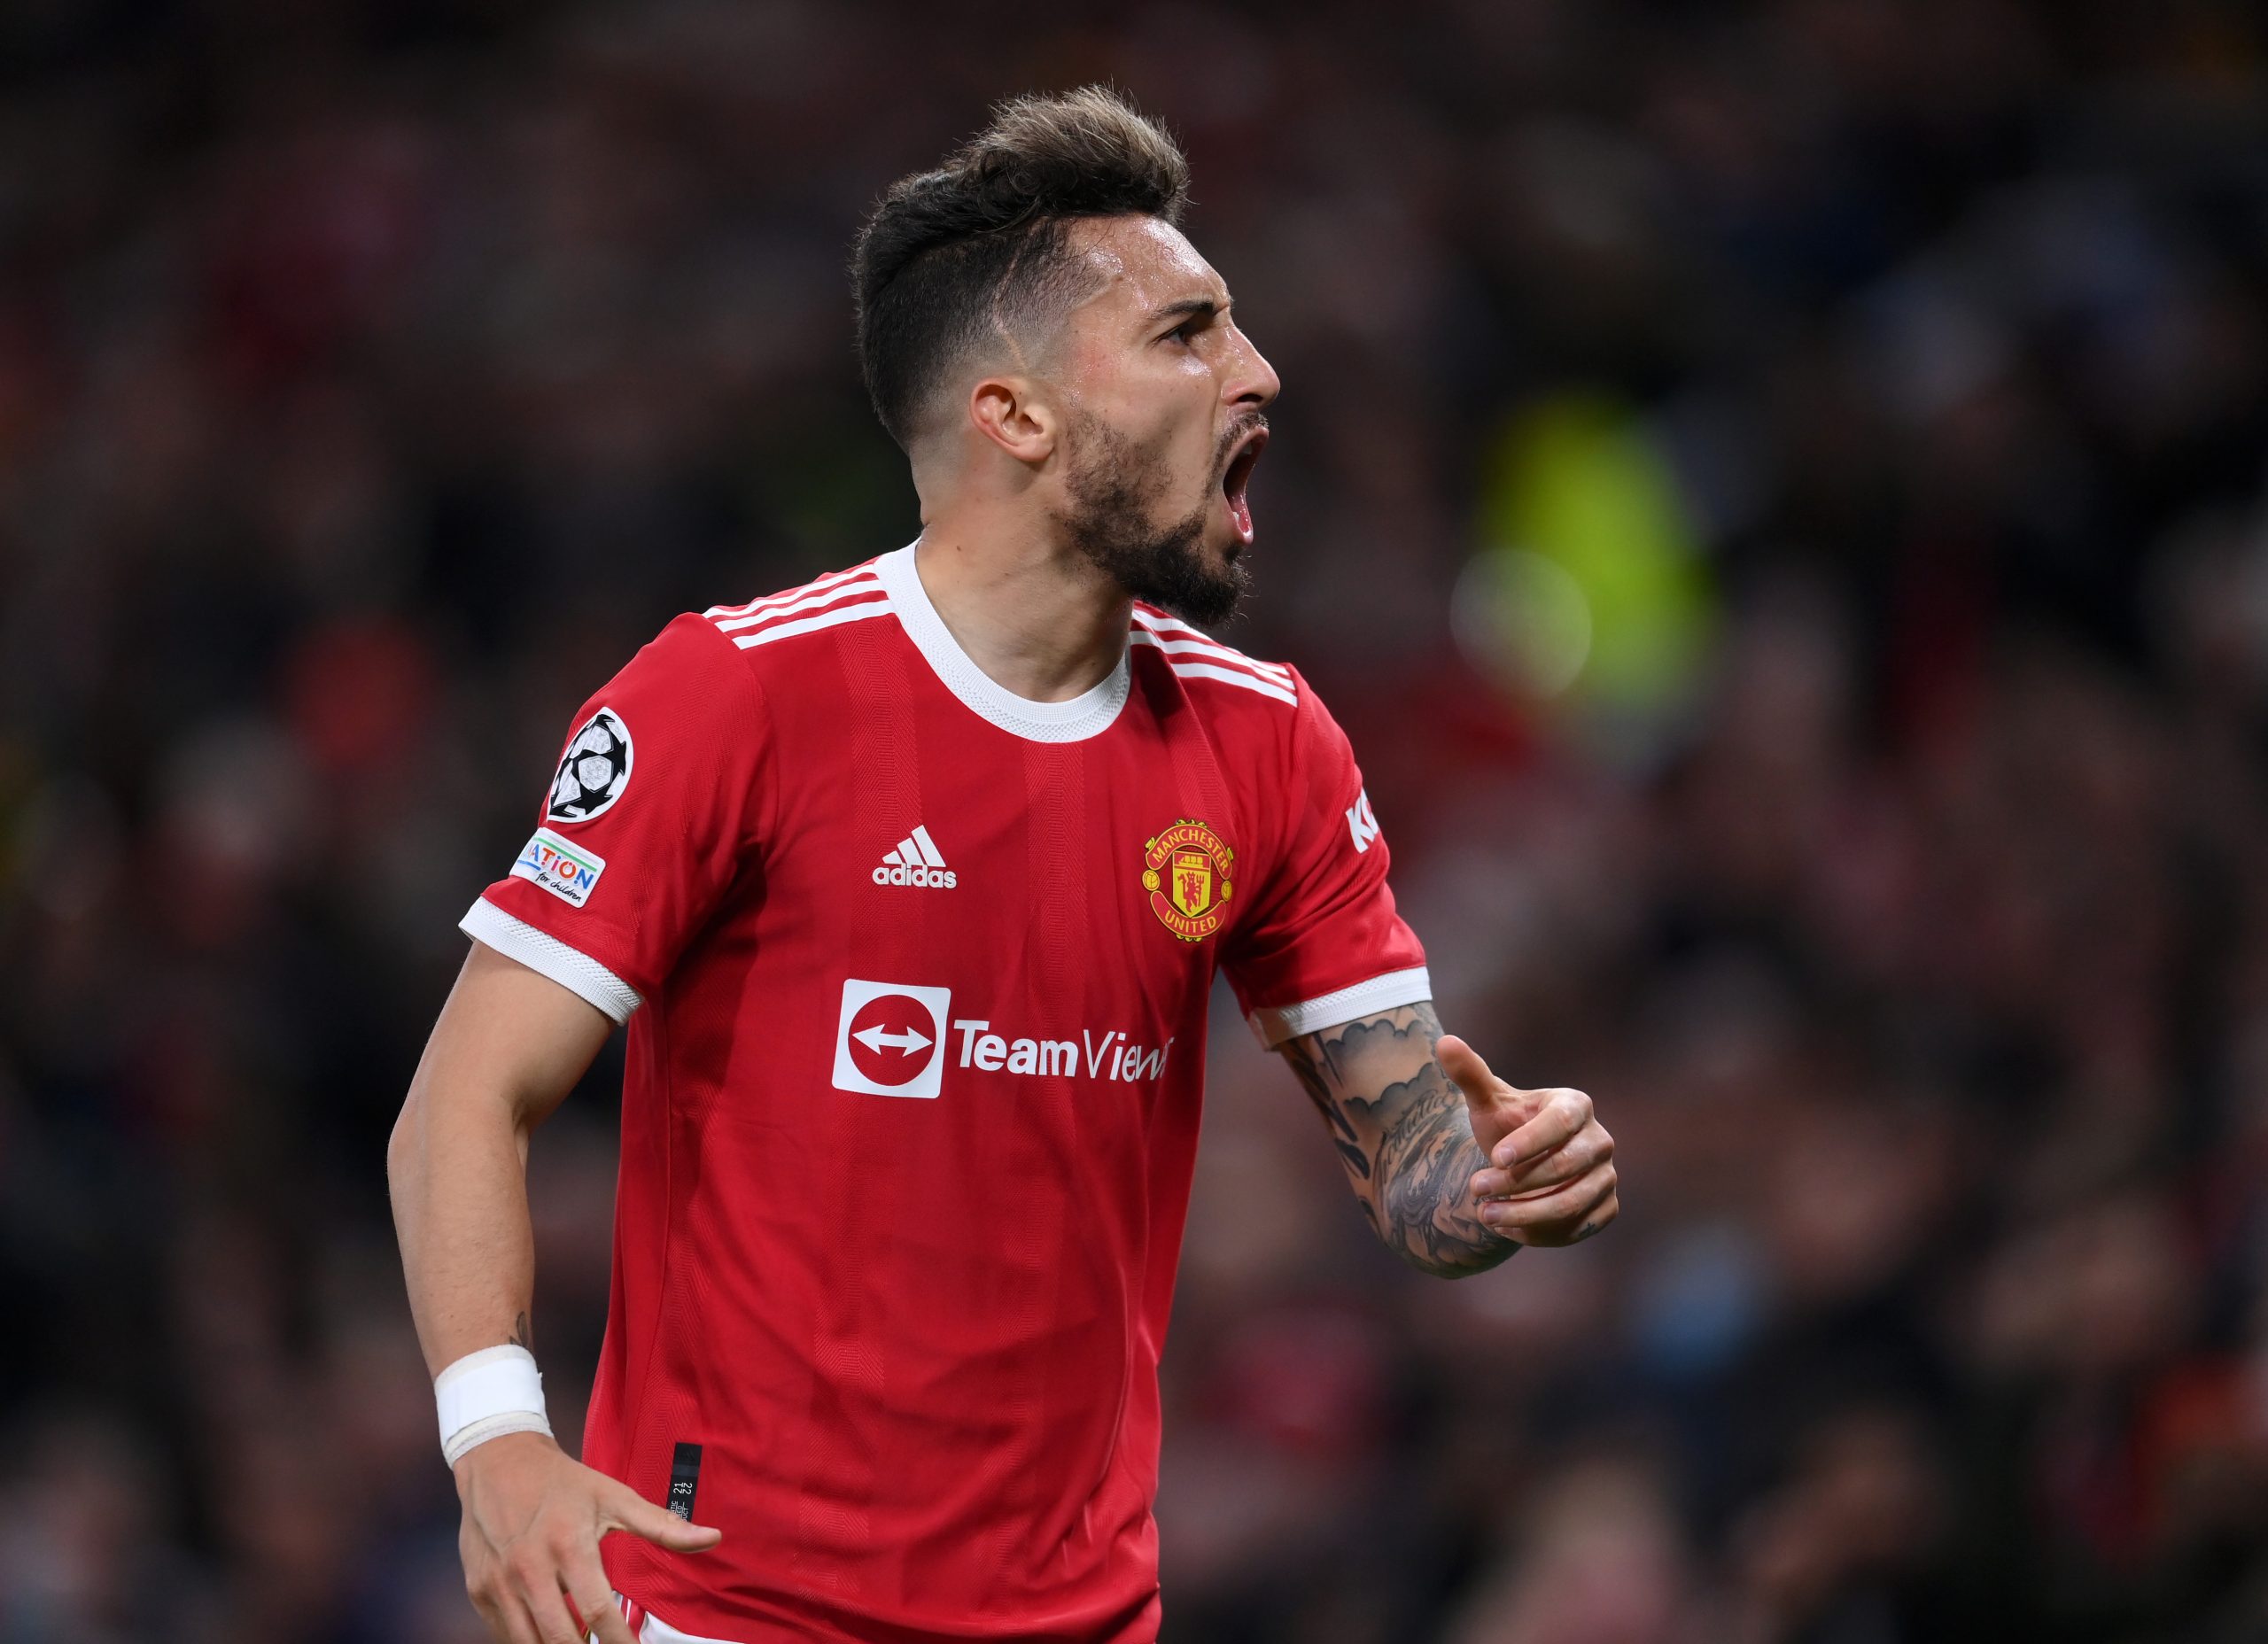 Manchester United left-back Alex Telles leaves on season-long loan with Sevilla paying his full wages.